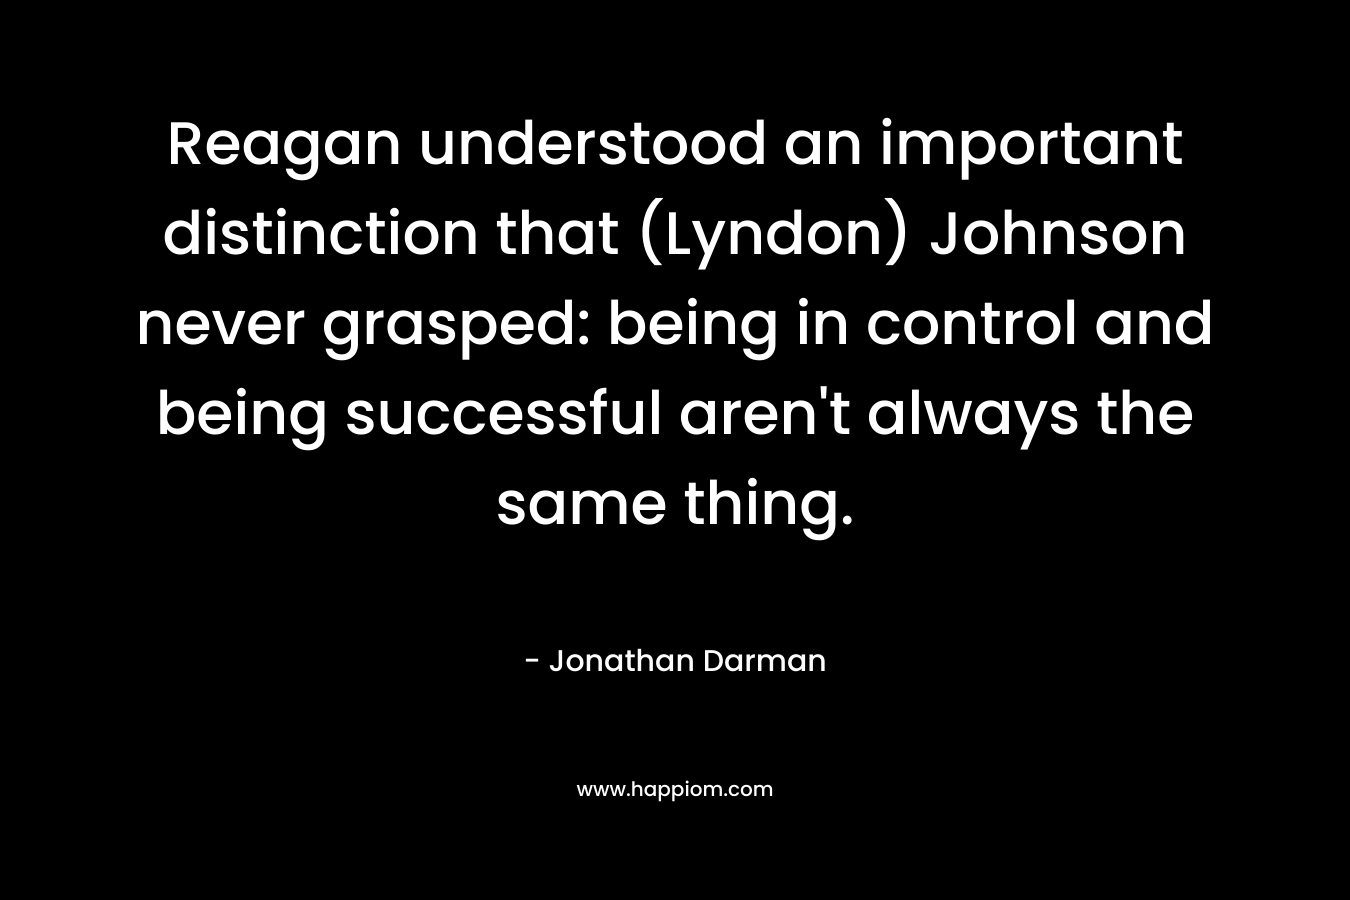 Reagan understood an important distinction that (Lyndon) Johnson never grasped: being in control and being successful aren’t always the same thing. – Jonathan Darman